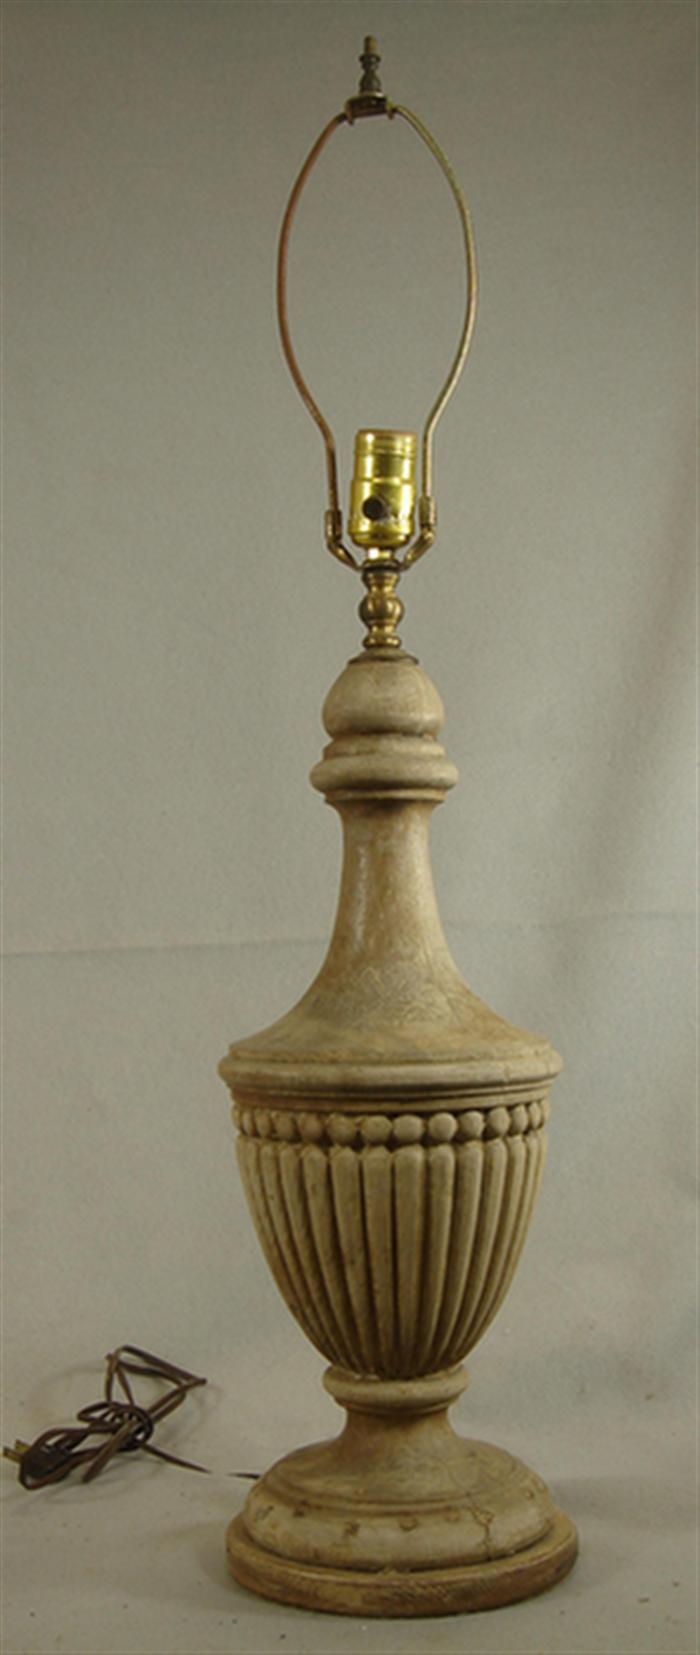 Carved wood urn form table lamp, painted